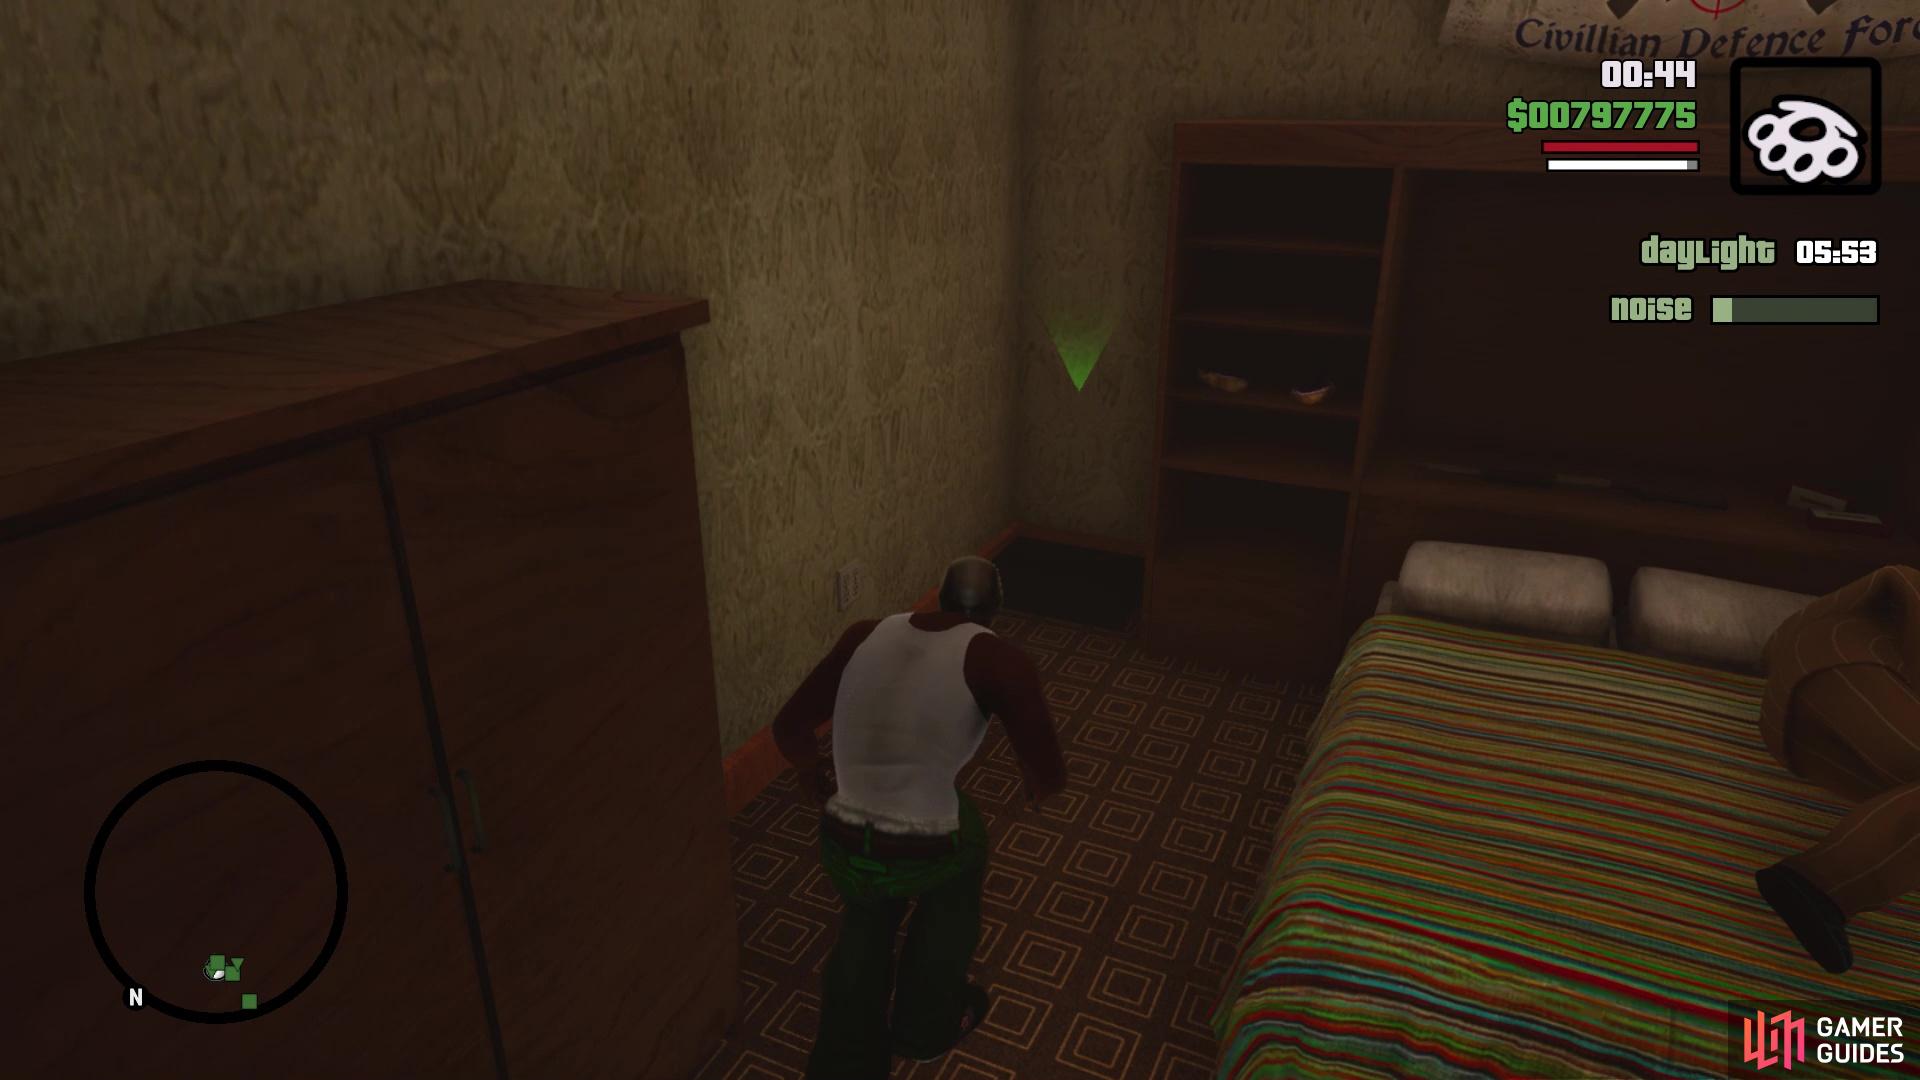 This crate is located in the owners bedroom